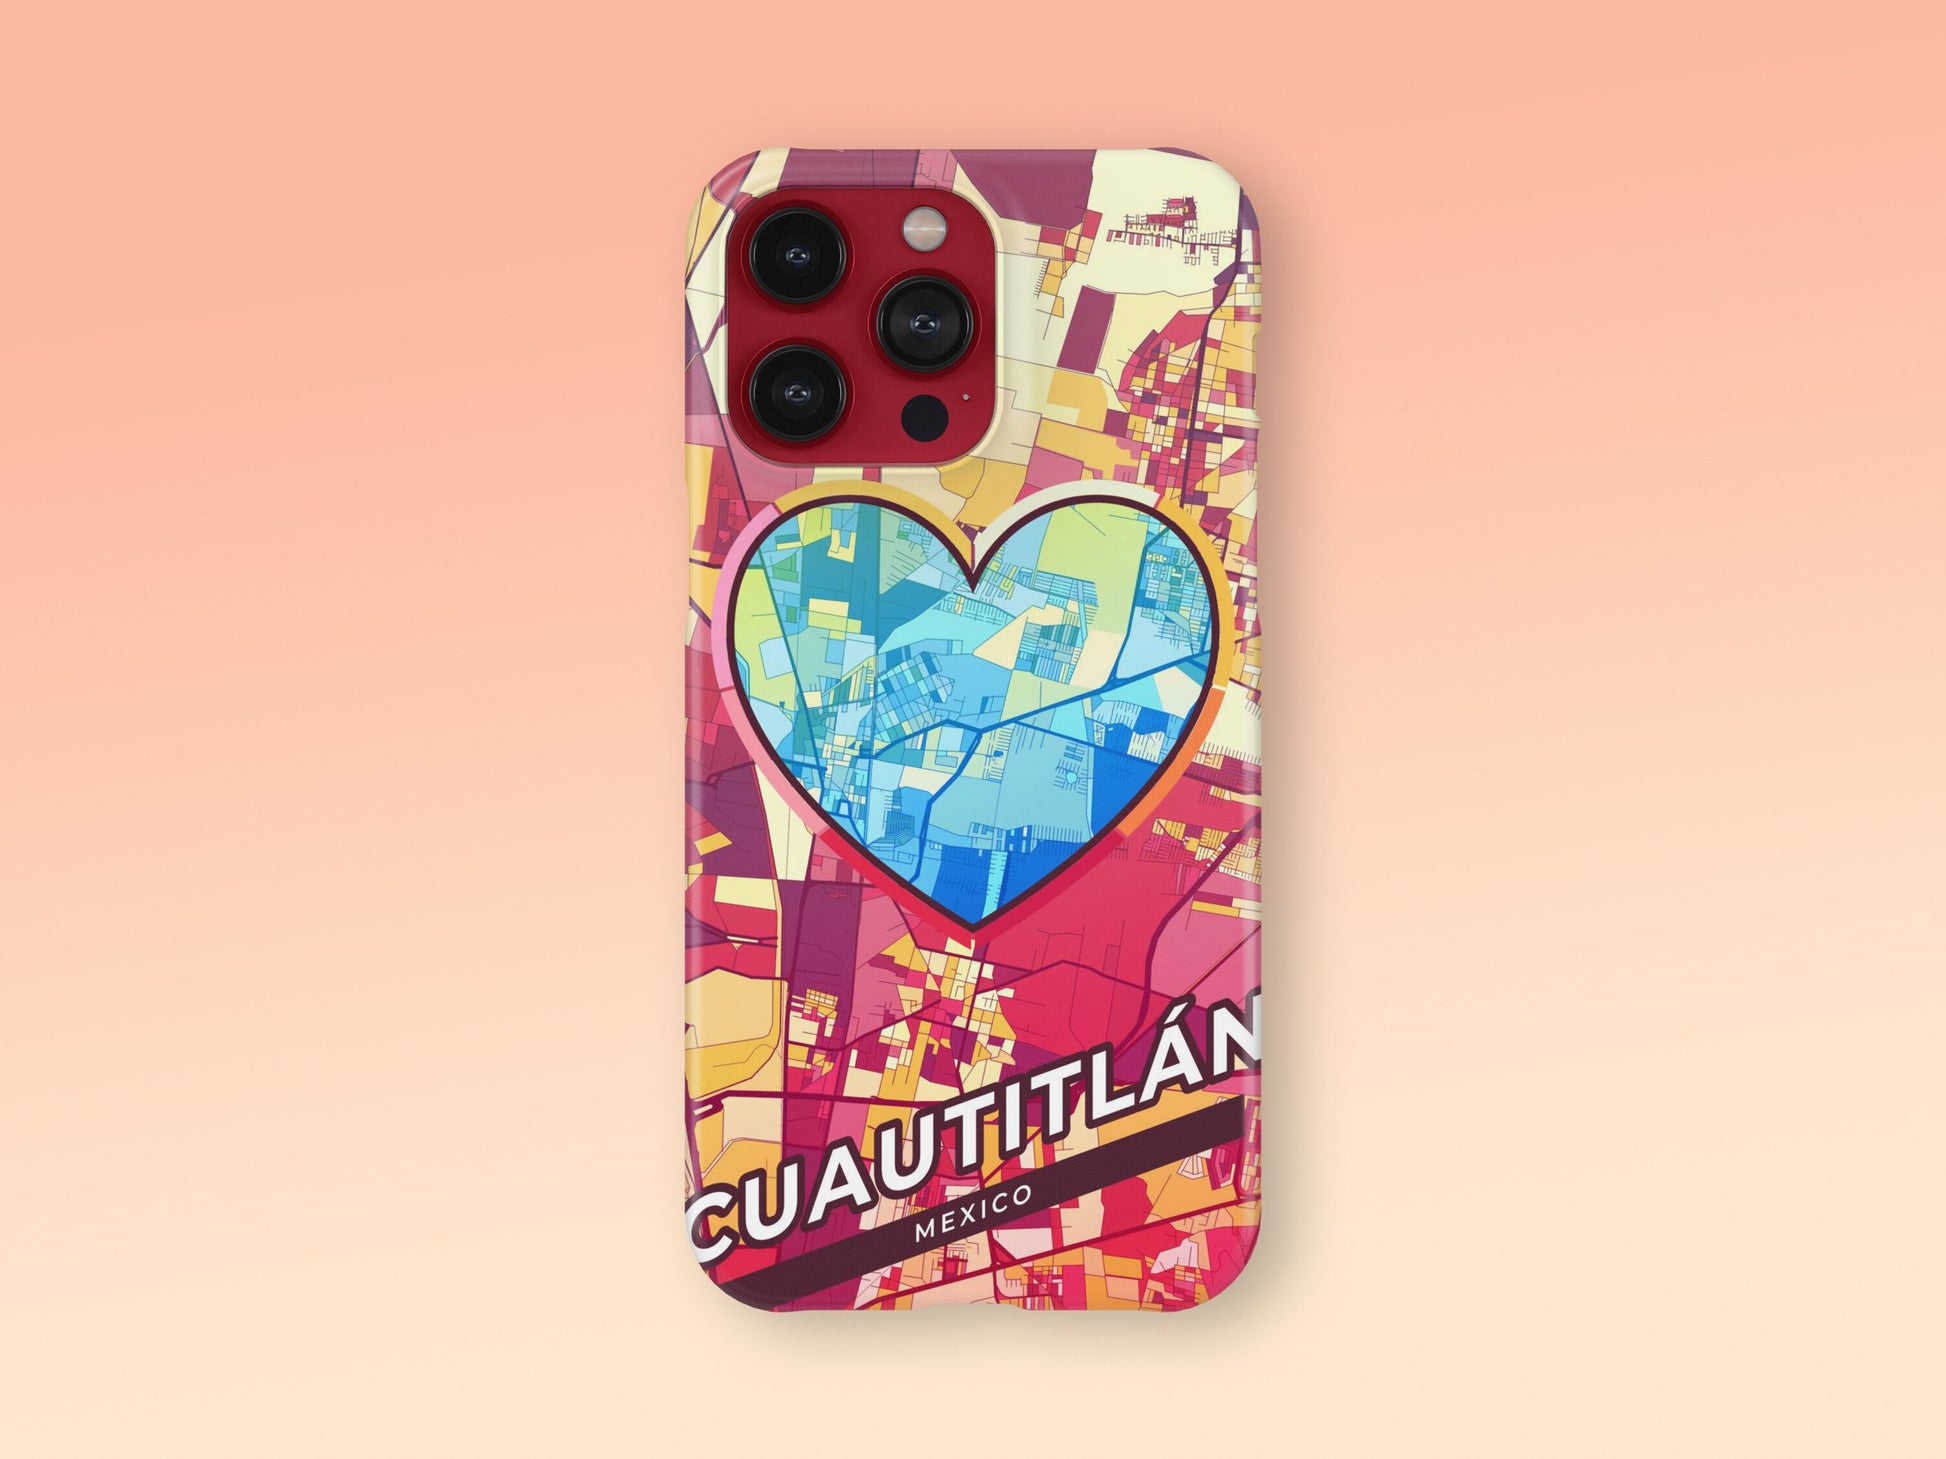 Cuautitlán Mexico slim phone case with colorful icon. Birthday, wedding or housewarming gift. Couple match cases. 2